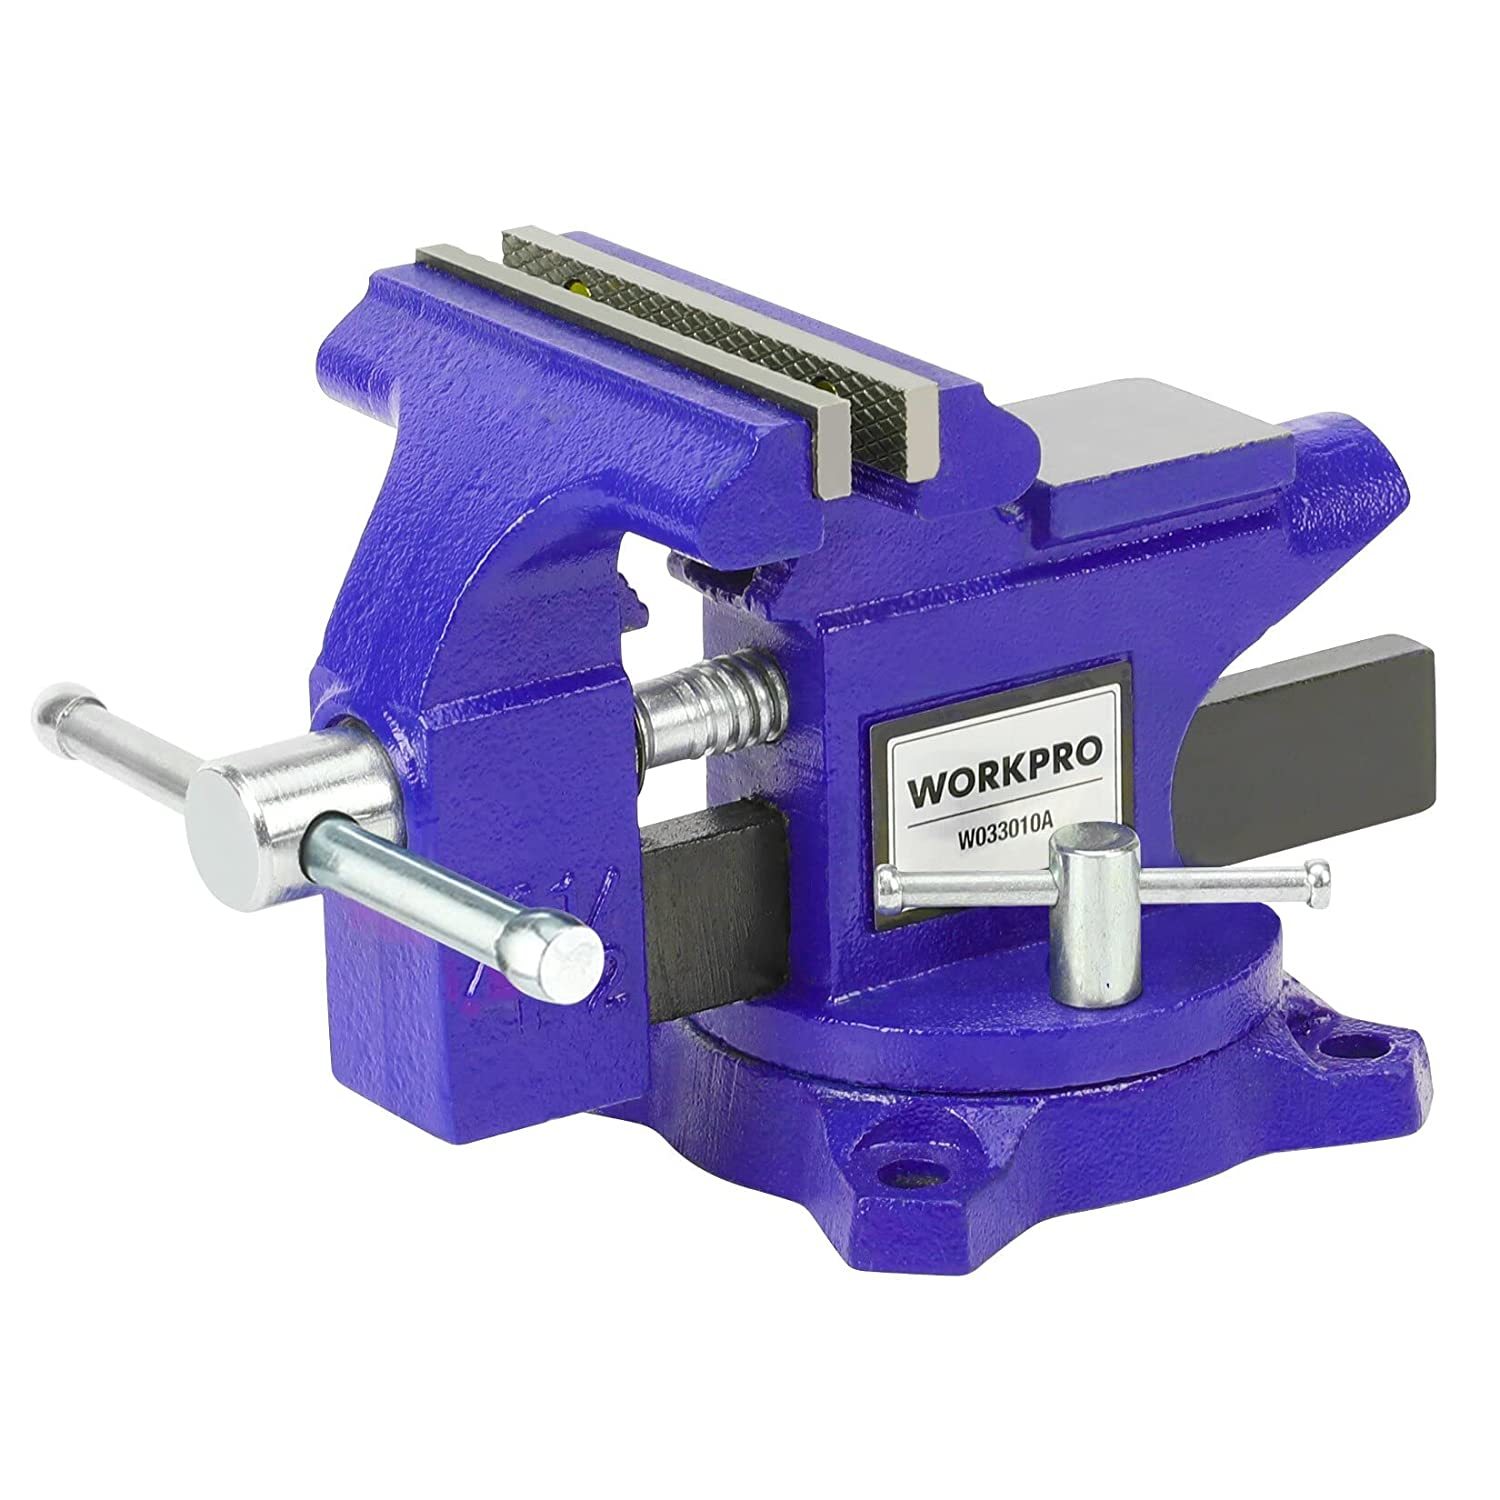 WORKPRO Bench Vise, 4-1/2" Vice for Workbench, Utility Combination Pipe Home Vis - $84.99